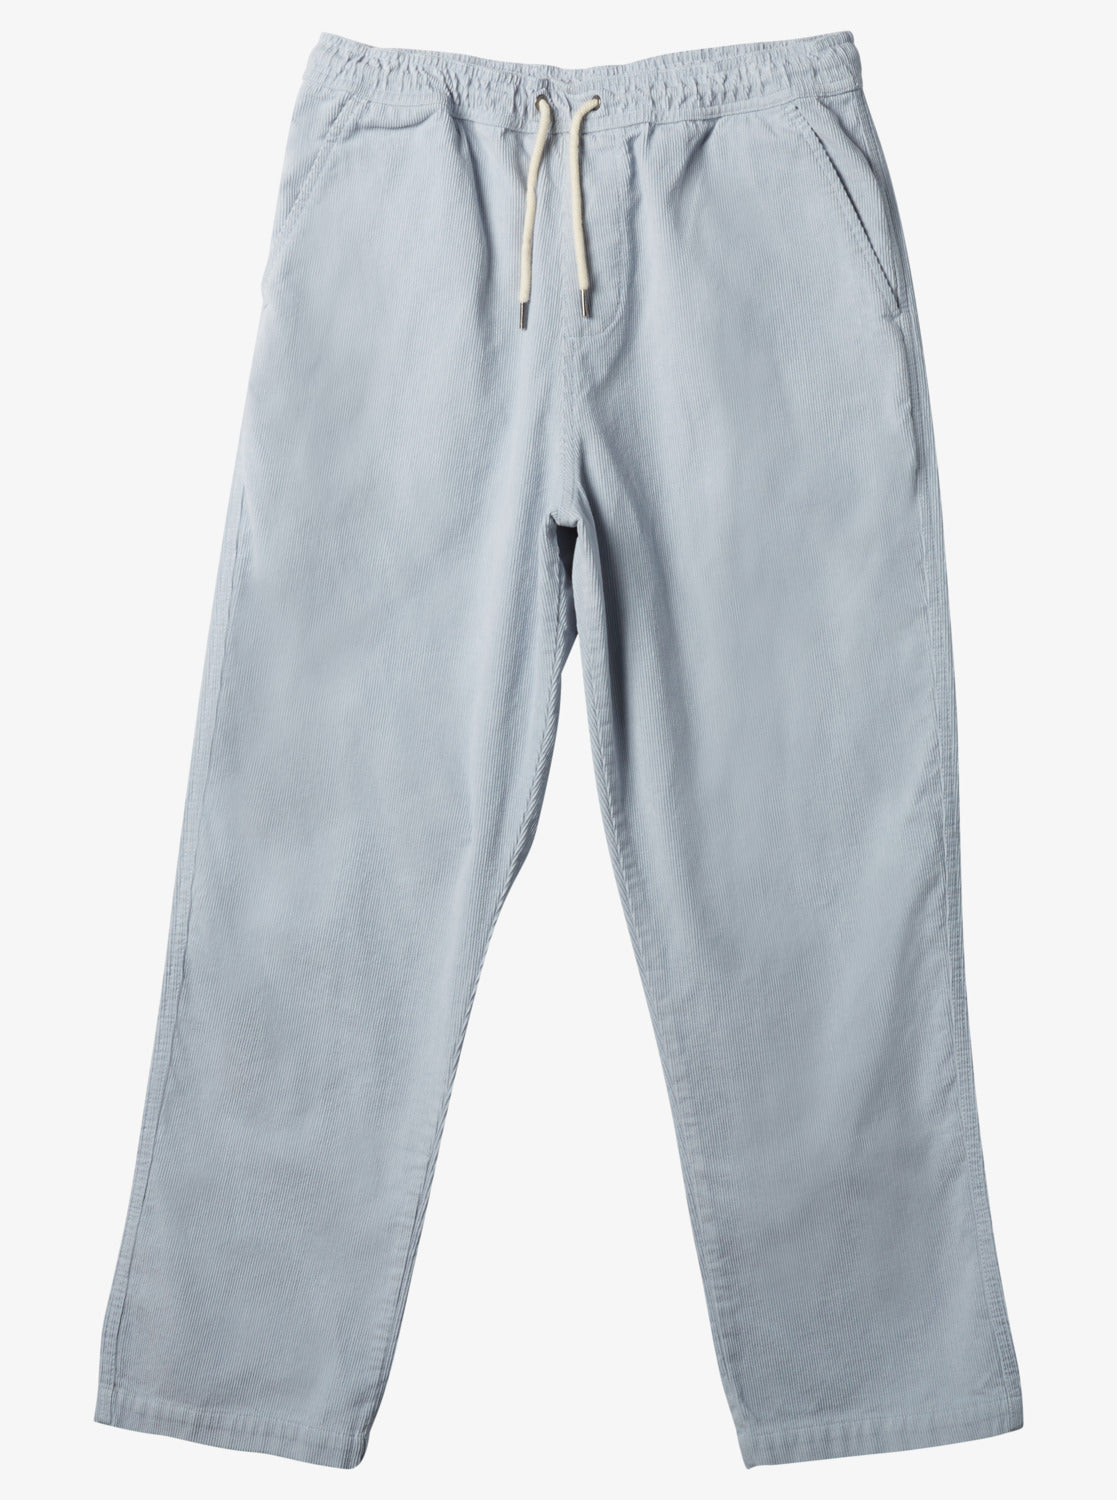 Quiksilver DNA Cord Beach Pants in blue fog from front